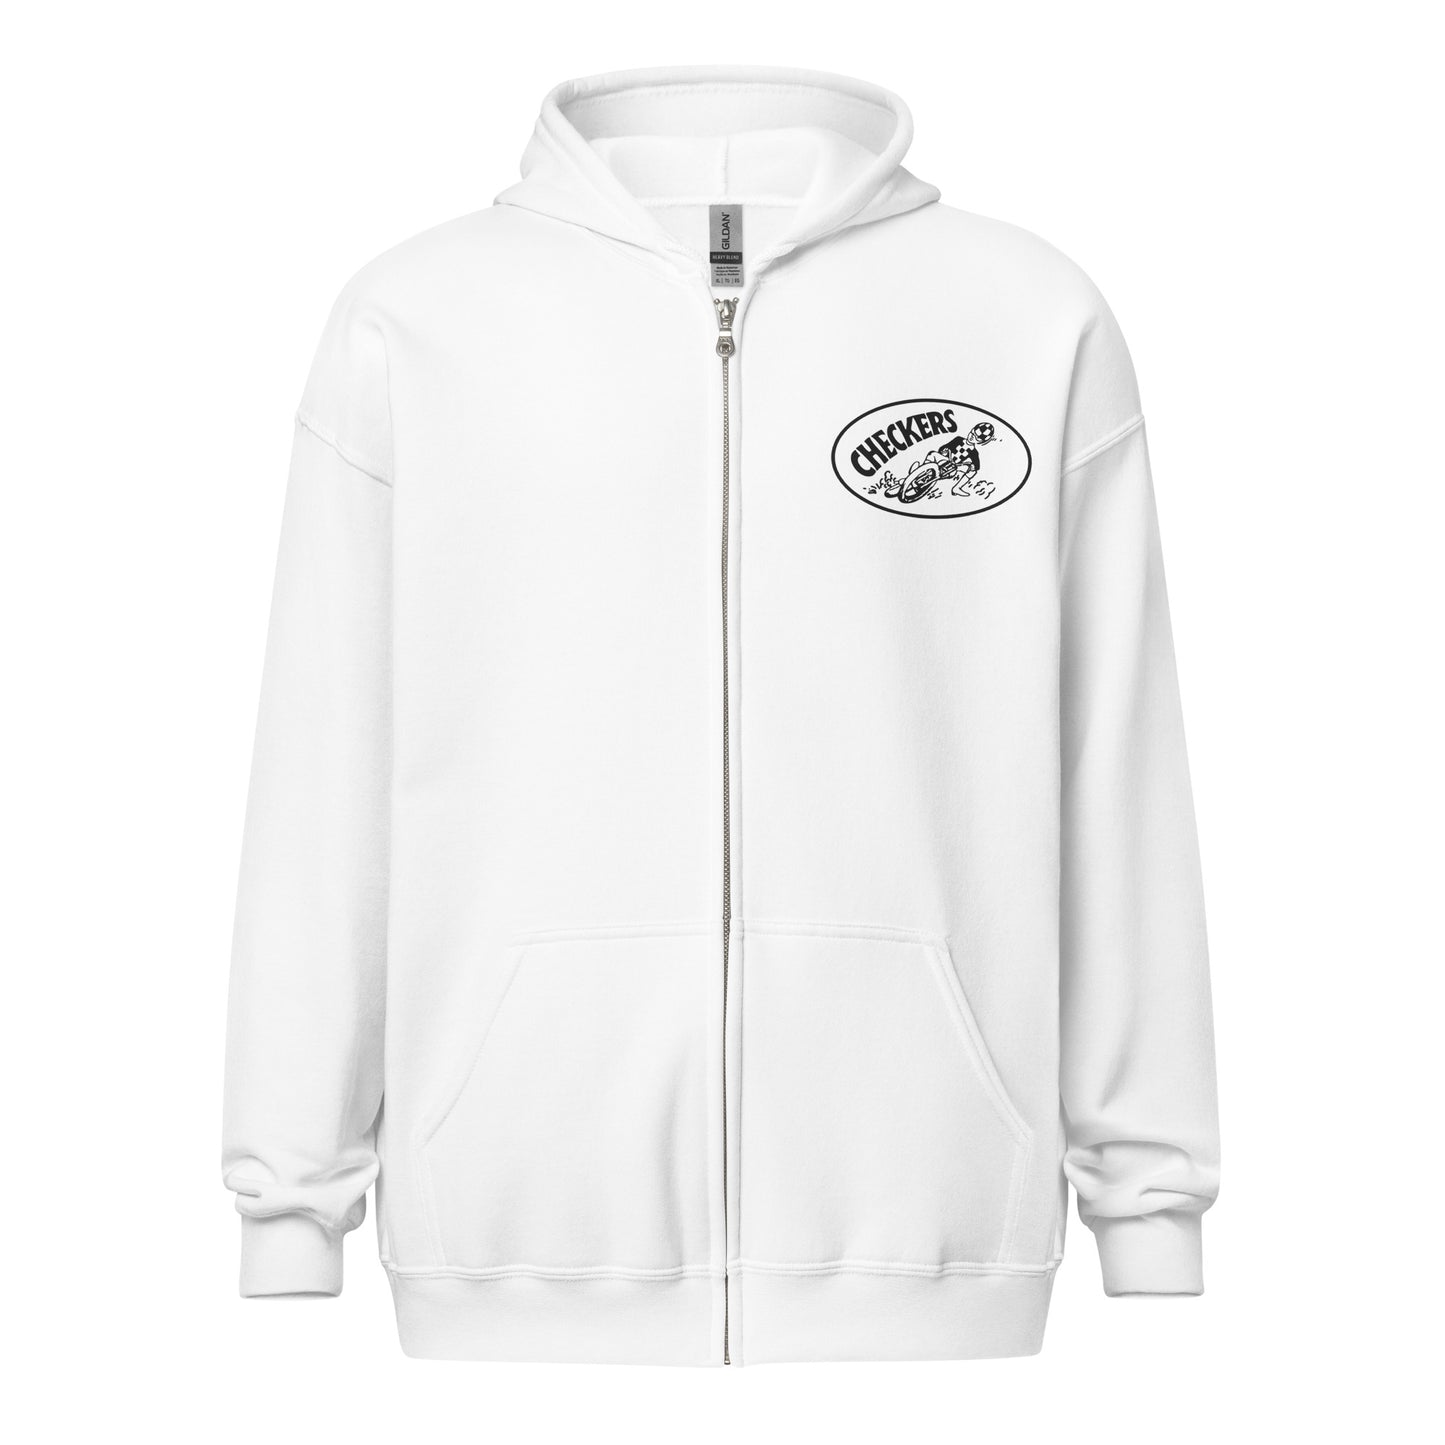 Checkers MC Zip Up Hoodie - Official Club Apparel